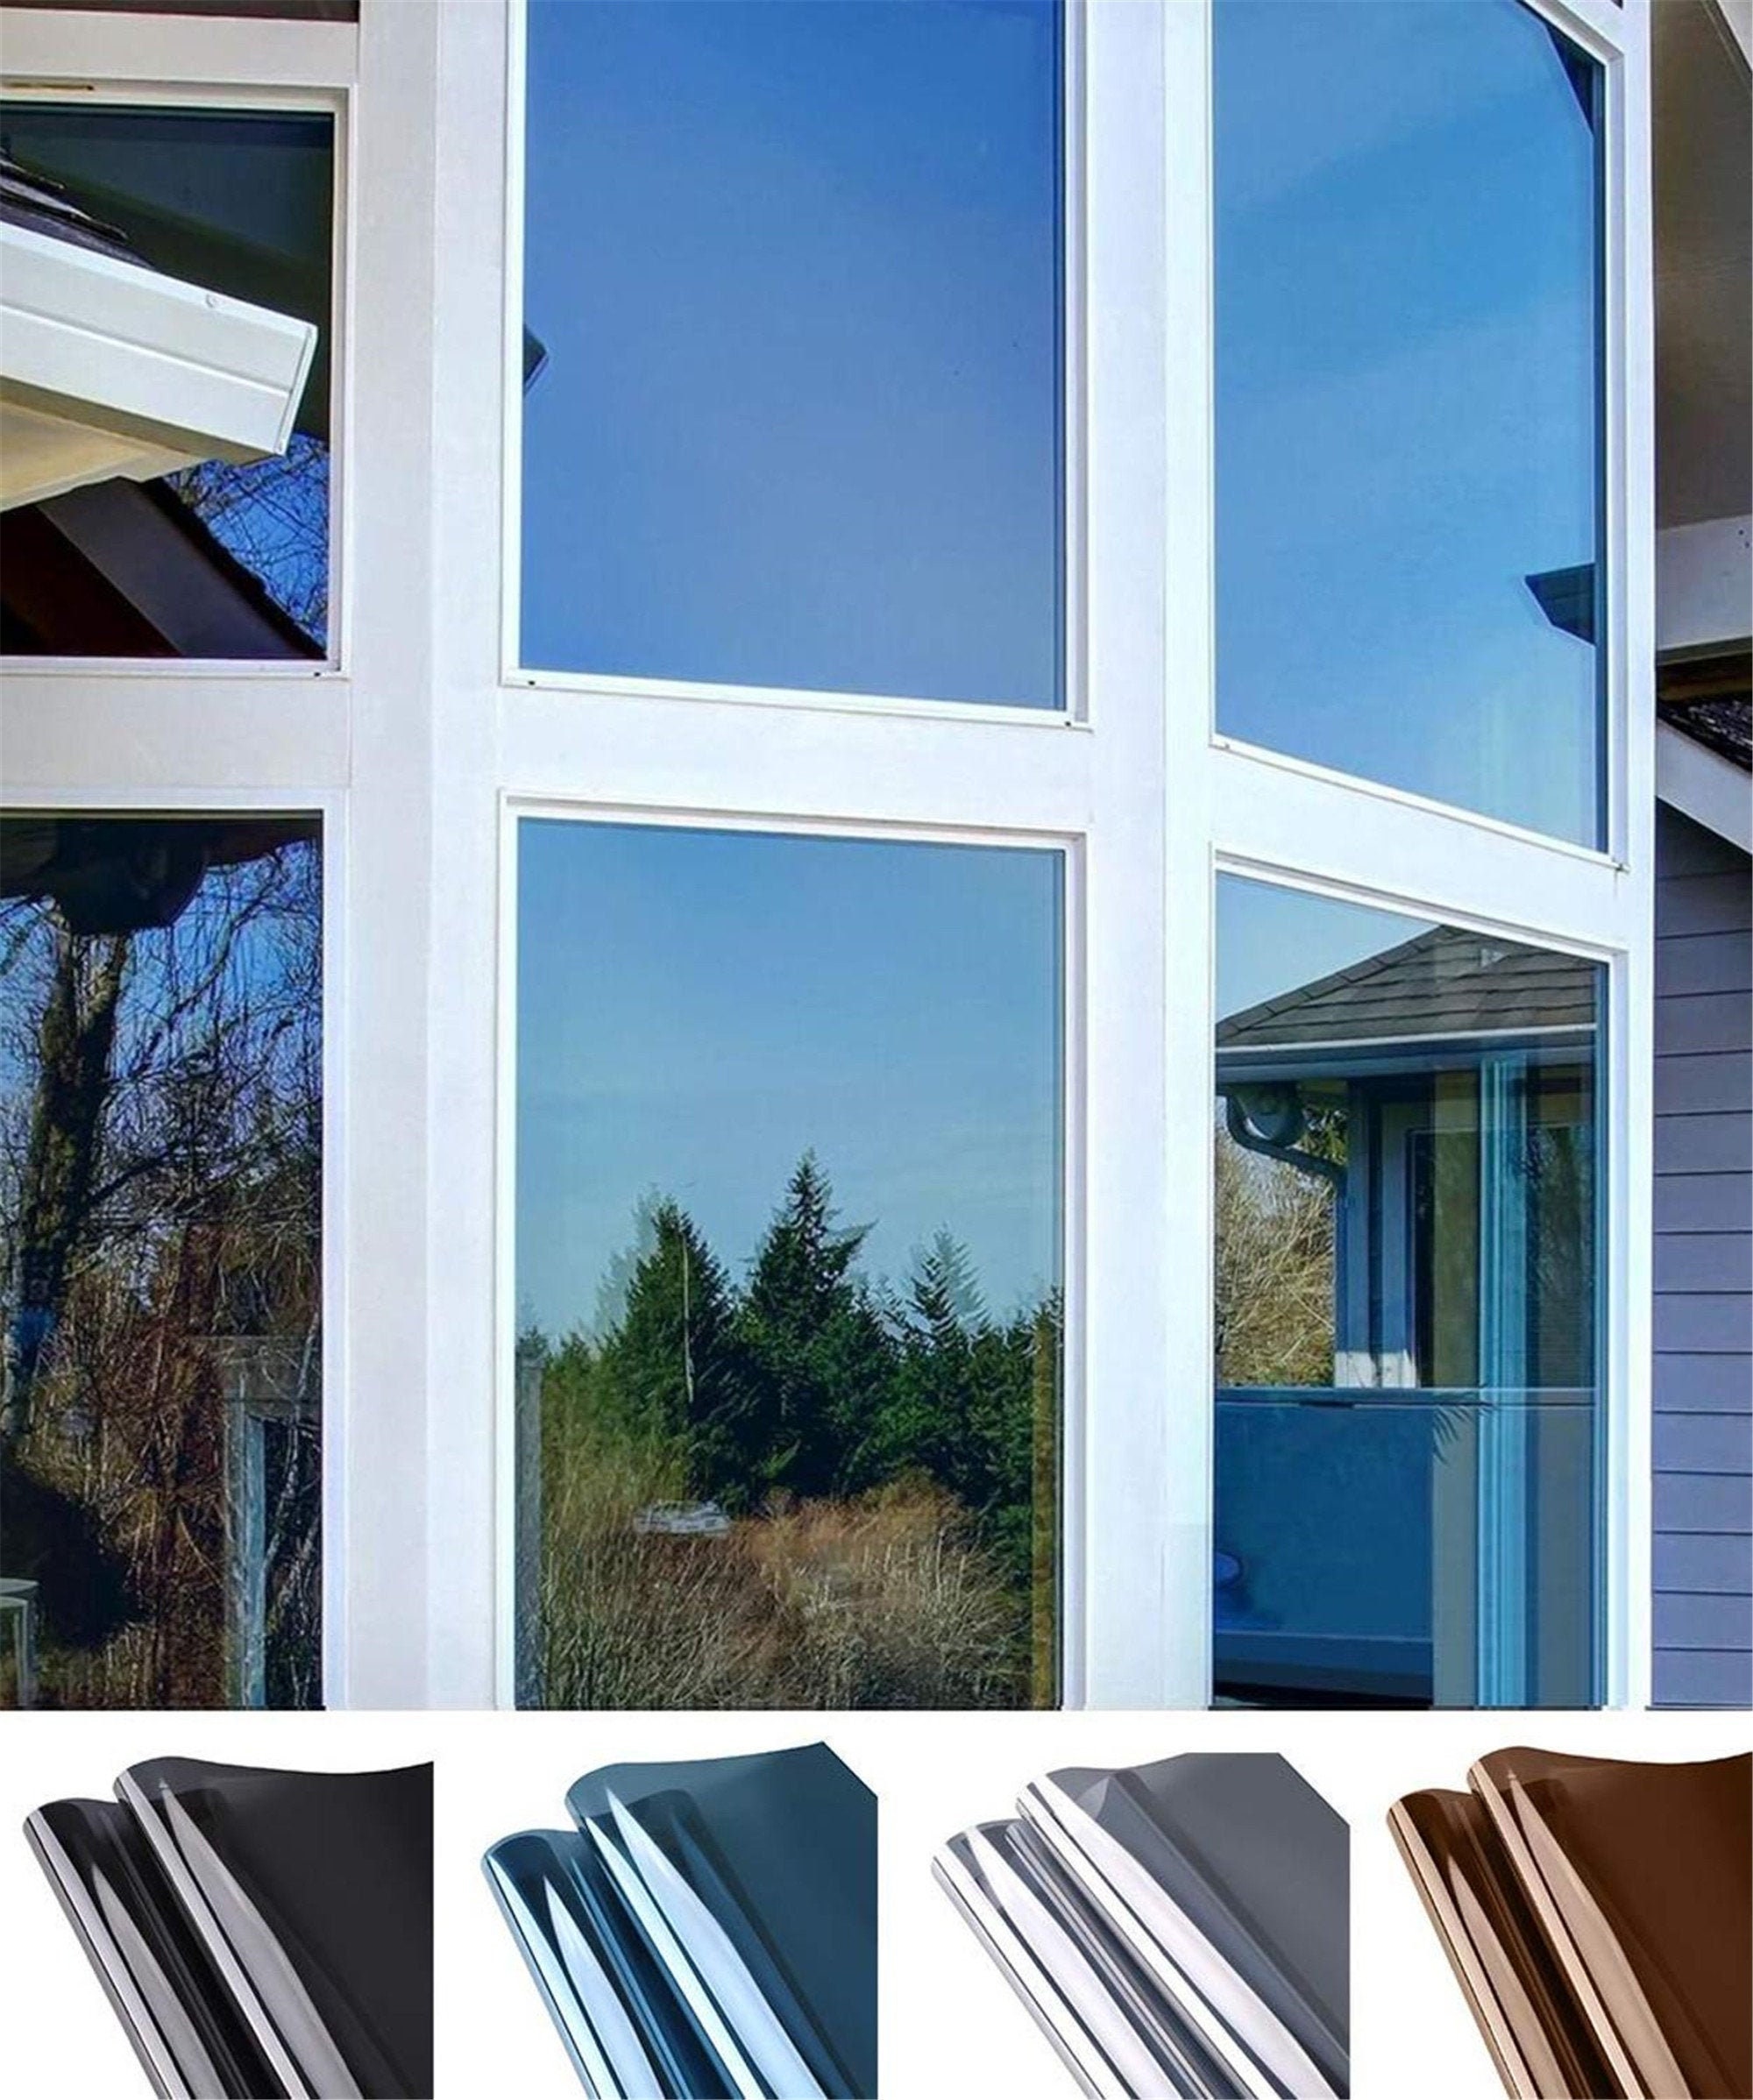 One Way Mirror Film with Nighttime Vision 5% - Window Film and More   Decorative Window Film, Privacy Window Film, Solar Film, Mirror Film